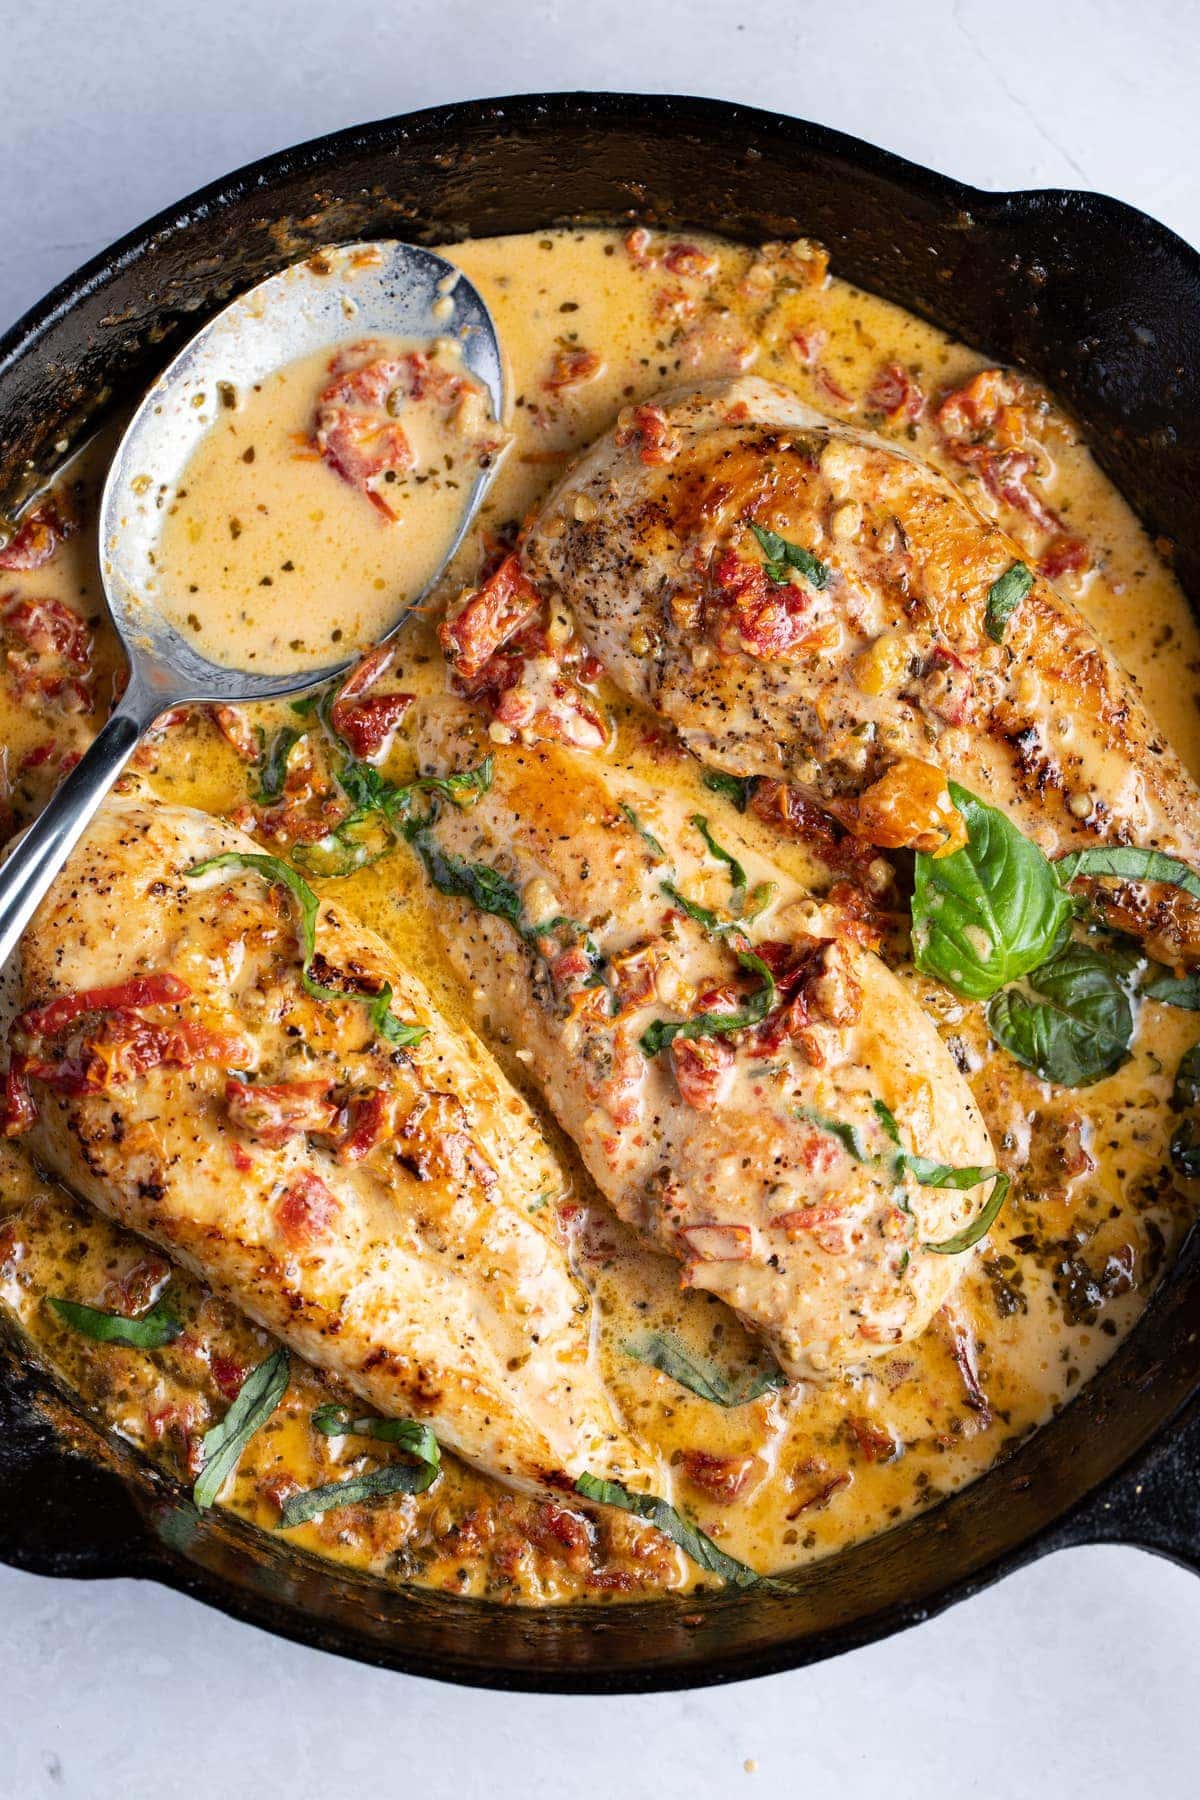 Marry Me Chicken (Chicken in a Sun Dried Tomato Cream Sauce) - 40 Aprons